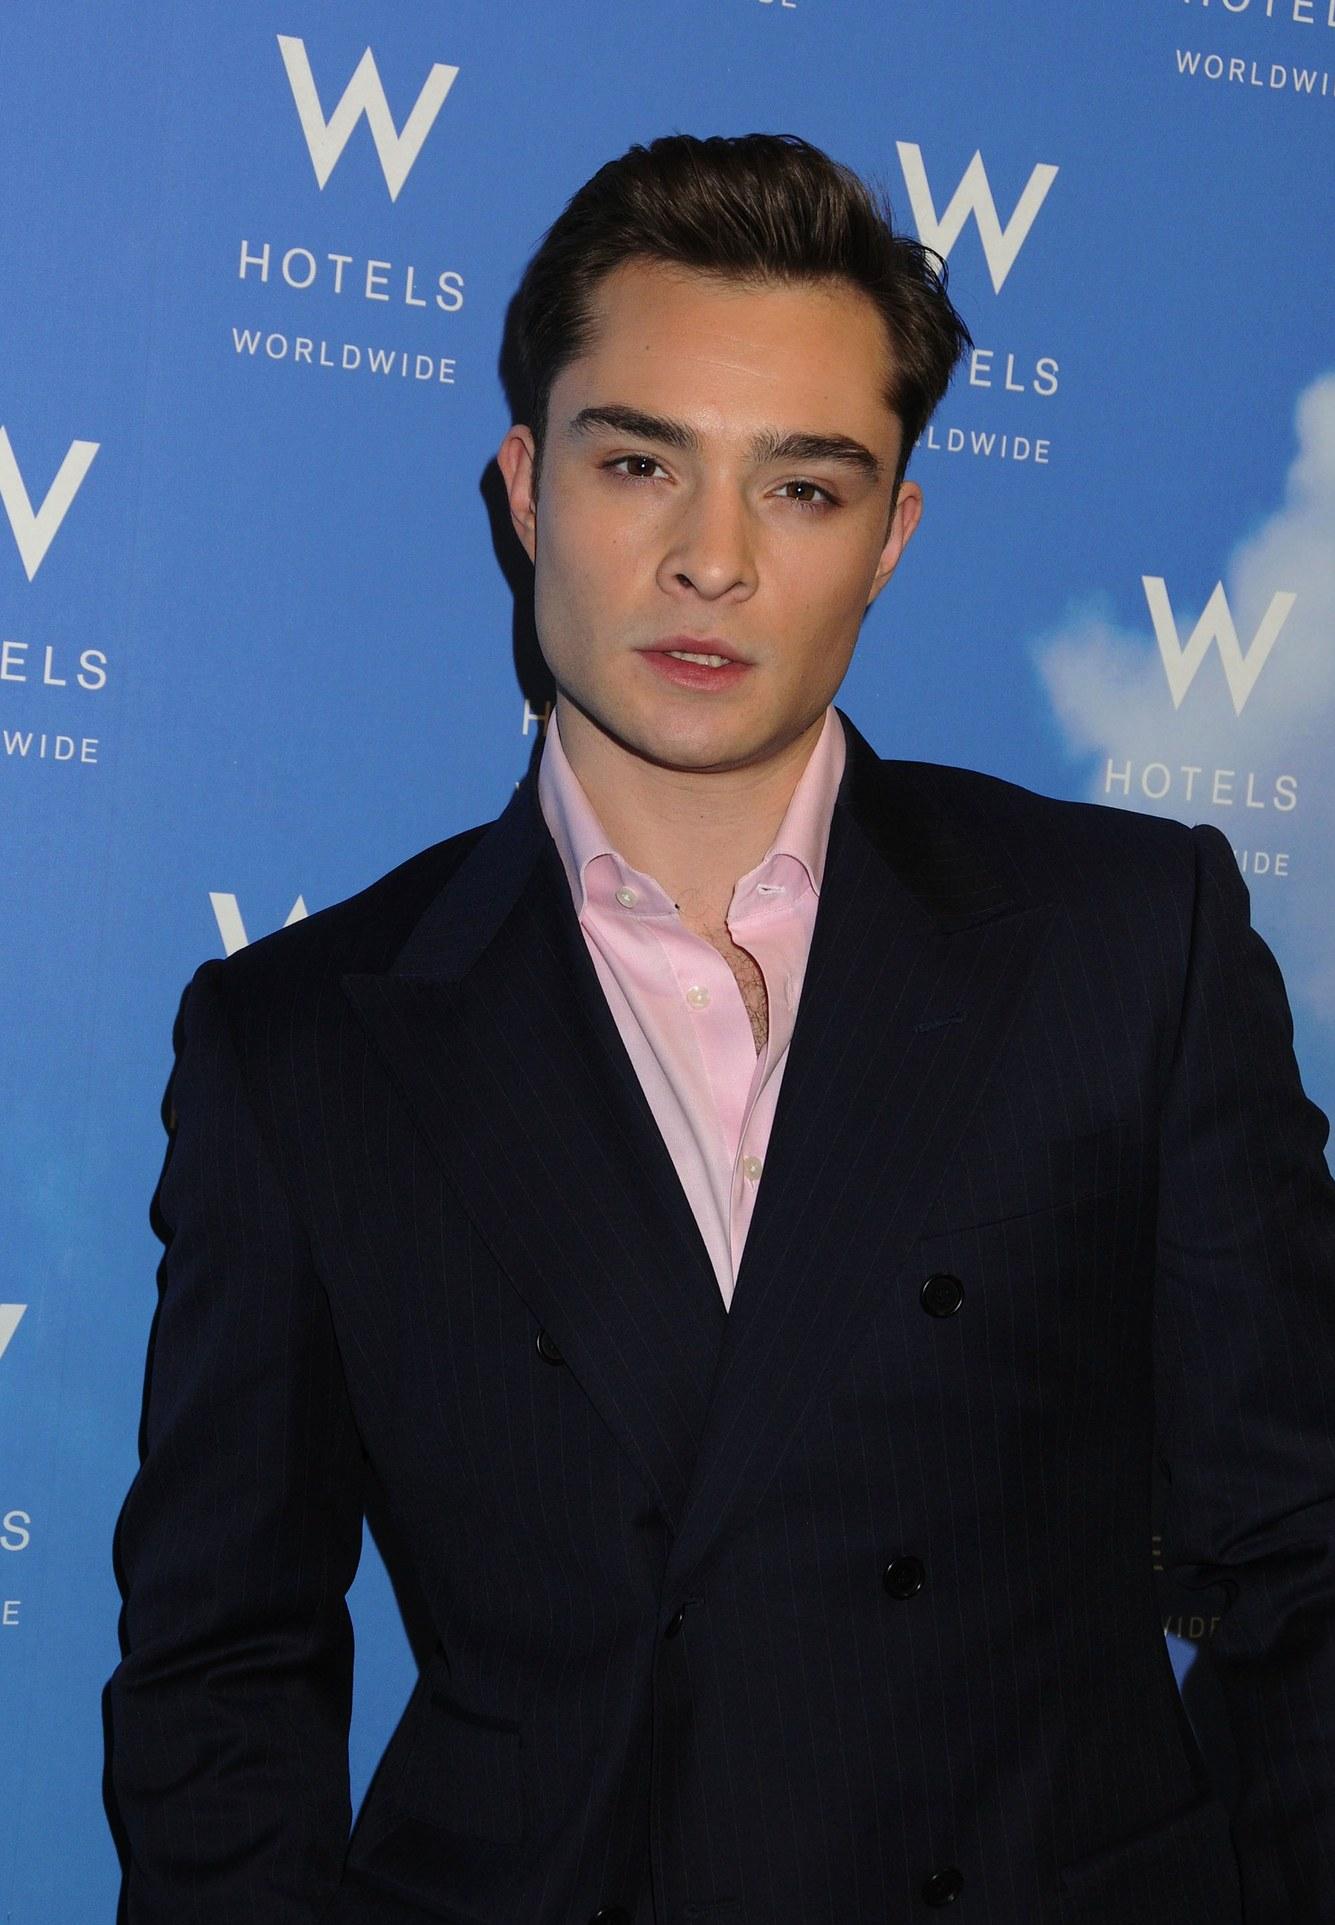 Ed Westwick photo 813 of 1473 pics, wallpaper - photo #535891 - ThePlace2